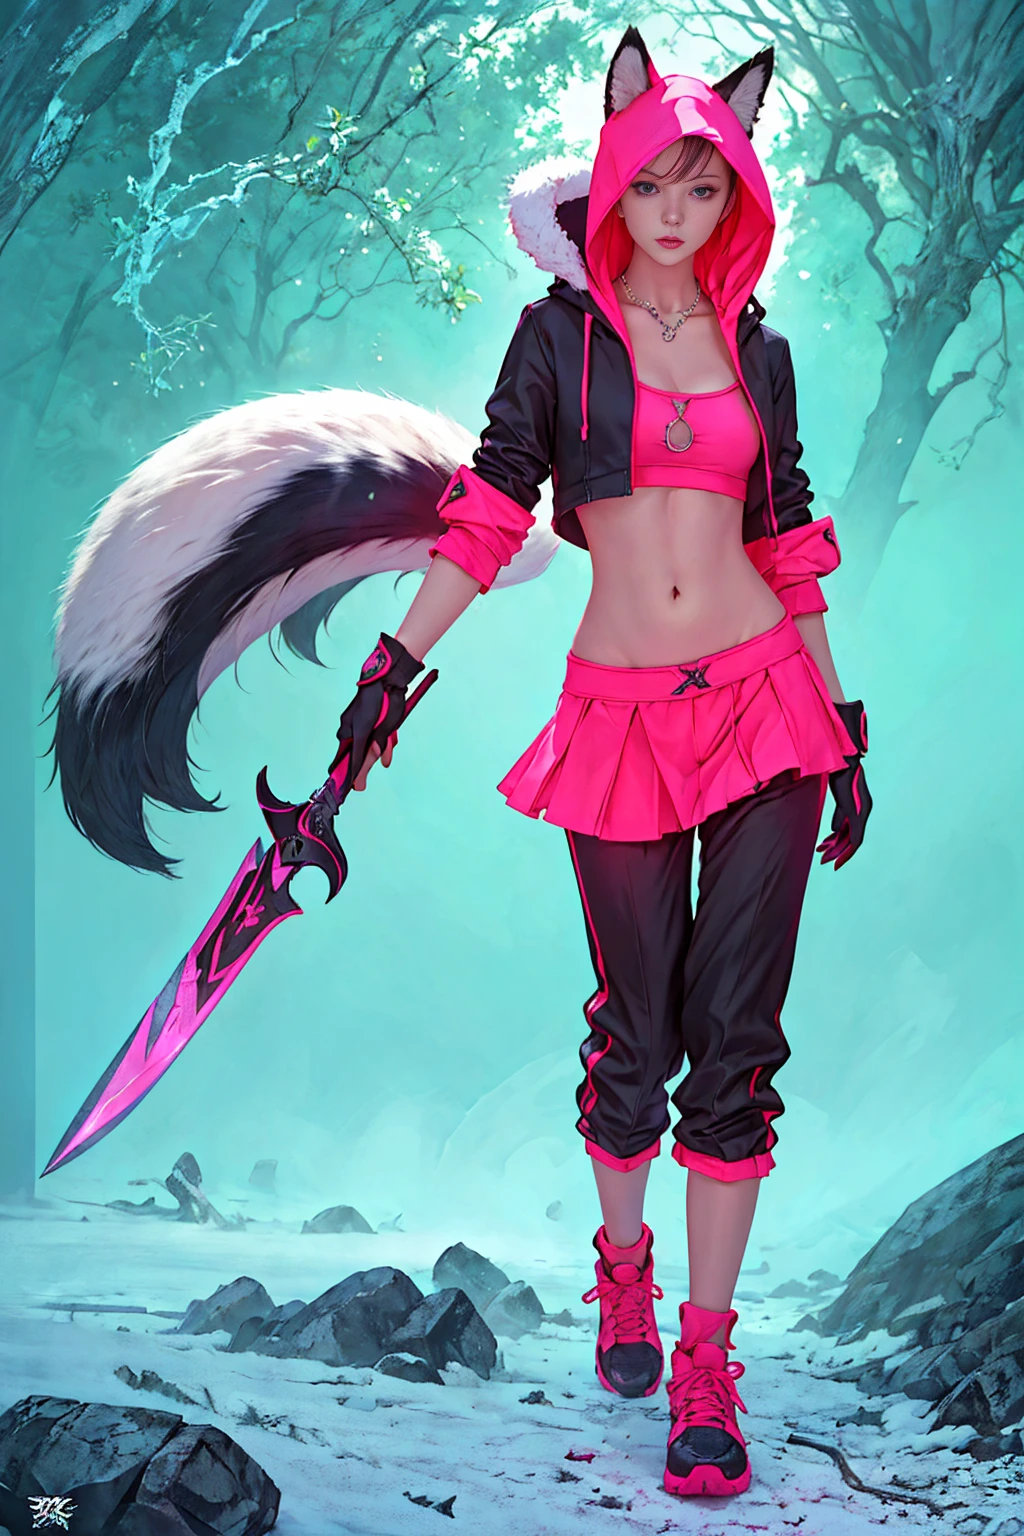 Oh, league of legend, sexy for, wallpapers, detailed eyes, fox ear, (fox tails), a skirt, (long pink fur), medium breasts, Looking at_Shown in_Looking atl espectador, short_Hair, gloves, belly button, fail, Blue_there are eyes, Eternal, full_body, weapon, Footwear, Necklaces, negro_gloves, pulp, hooded, Hair_overcome_Yoon_there are eyes, cultivator_above, hoodie, negro_pants, sneakers, cut_Jacket, cyber punk character, cut_hoodie, ((anatomically perfect:1.5))